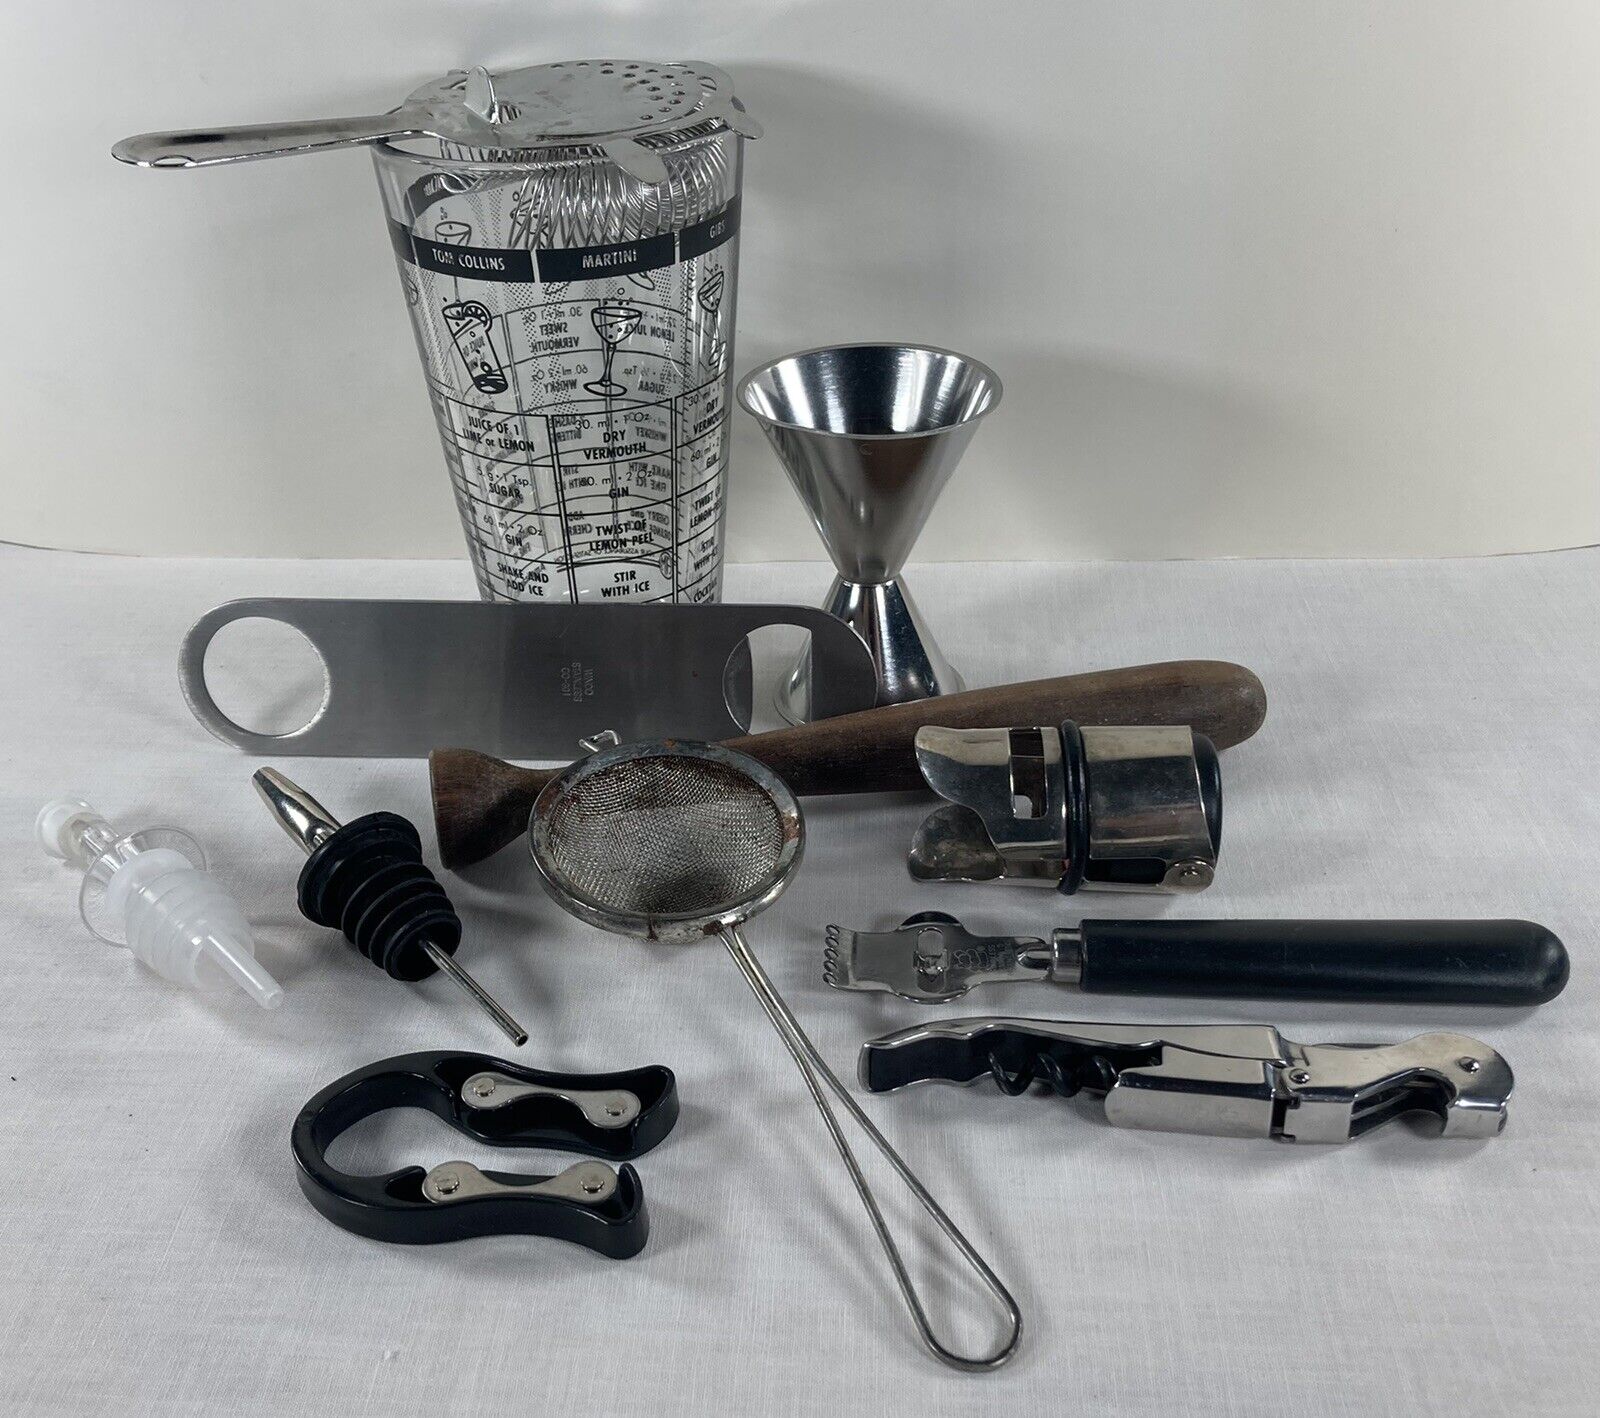 Bartender Tools And Supplies, 12 Piece, Make Craft Cocktails At Home Awesome Set